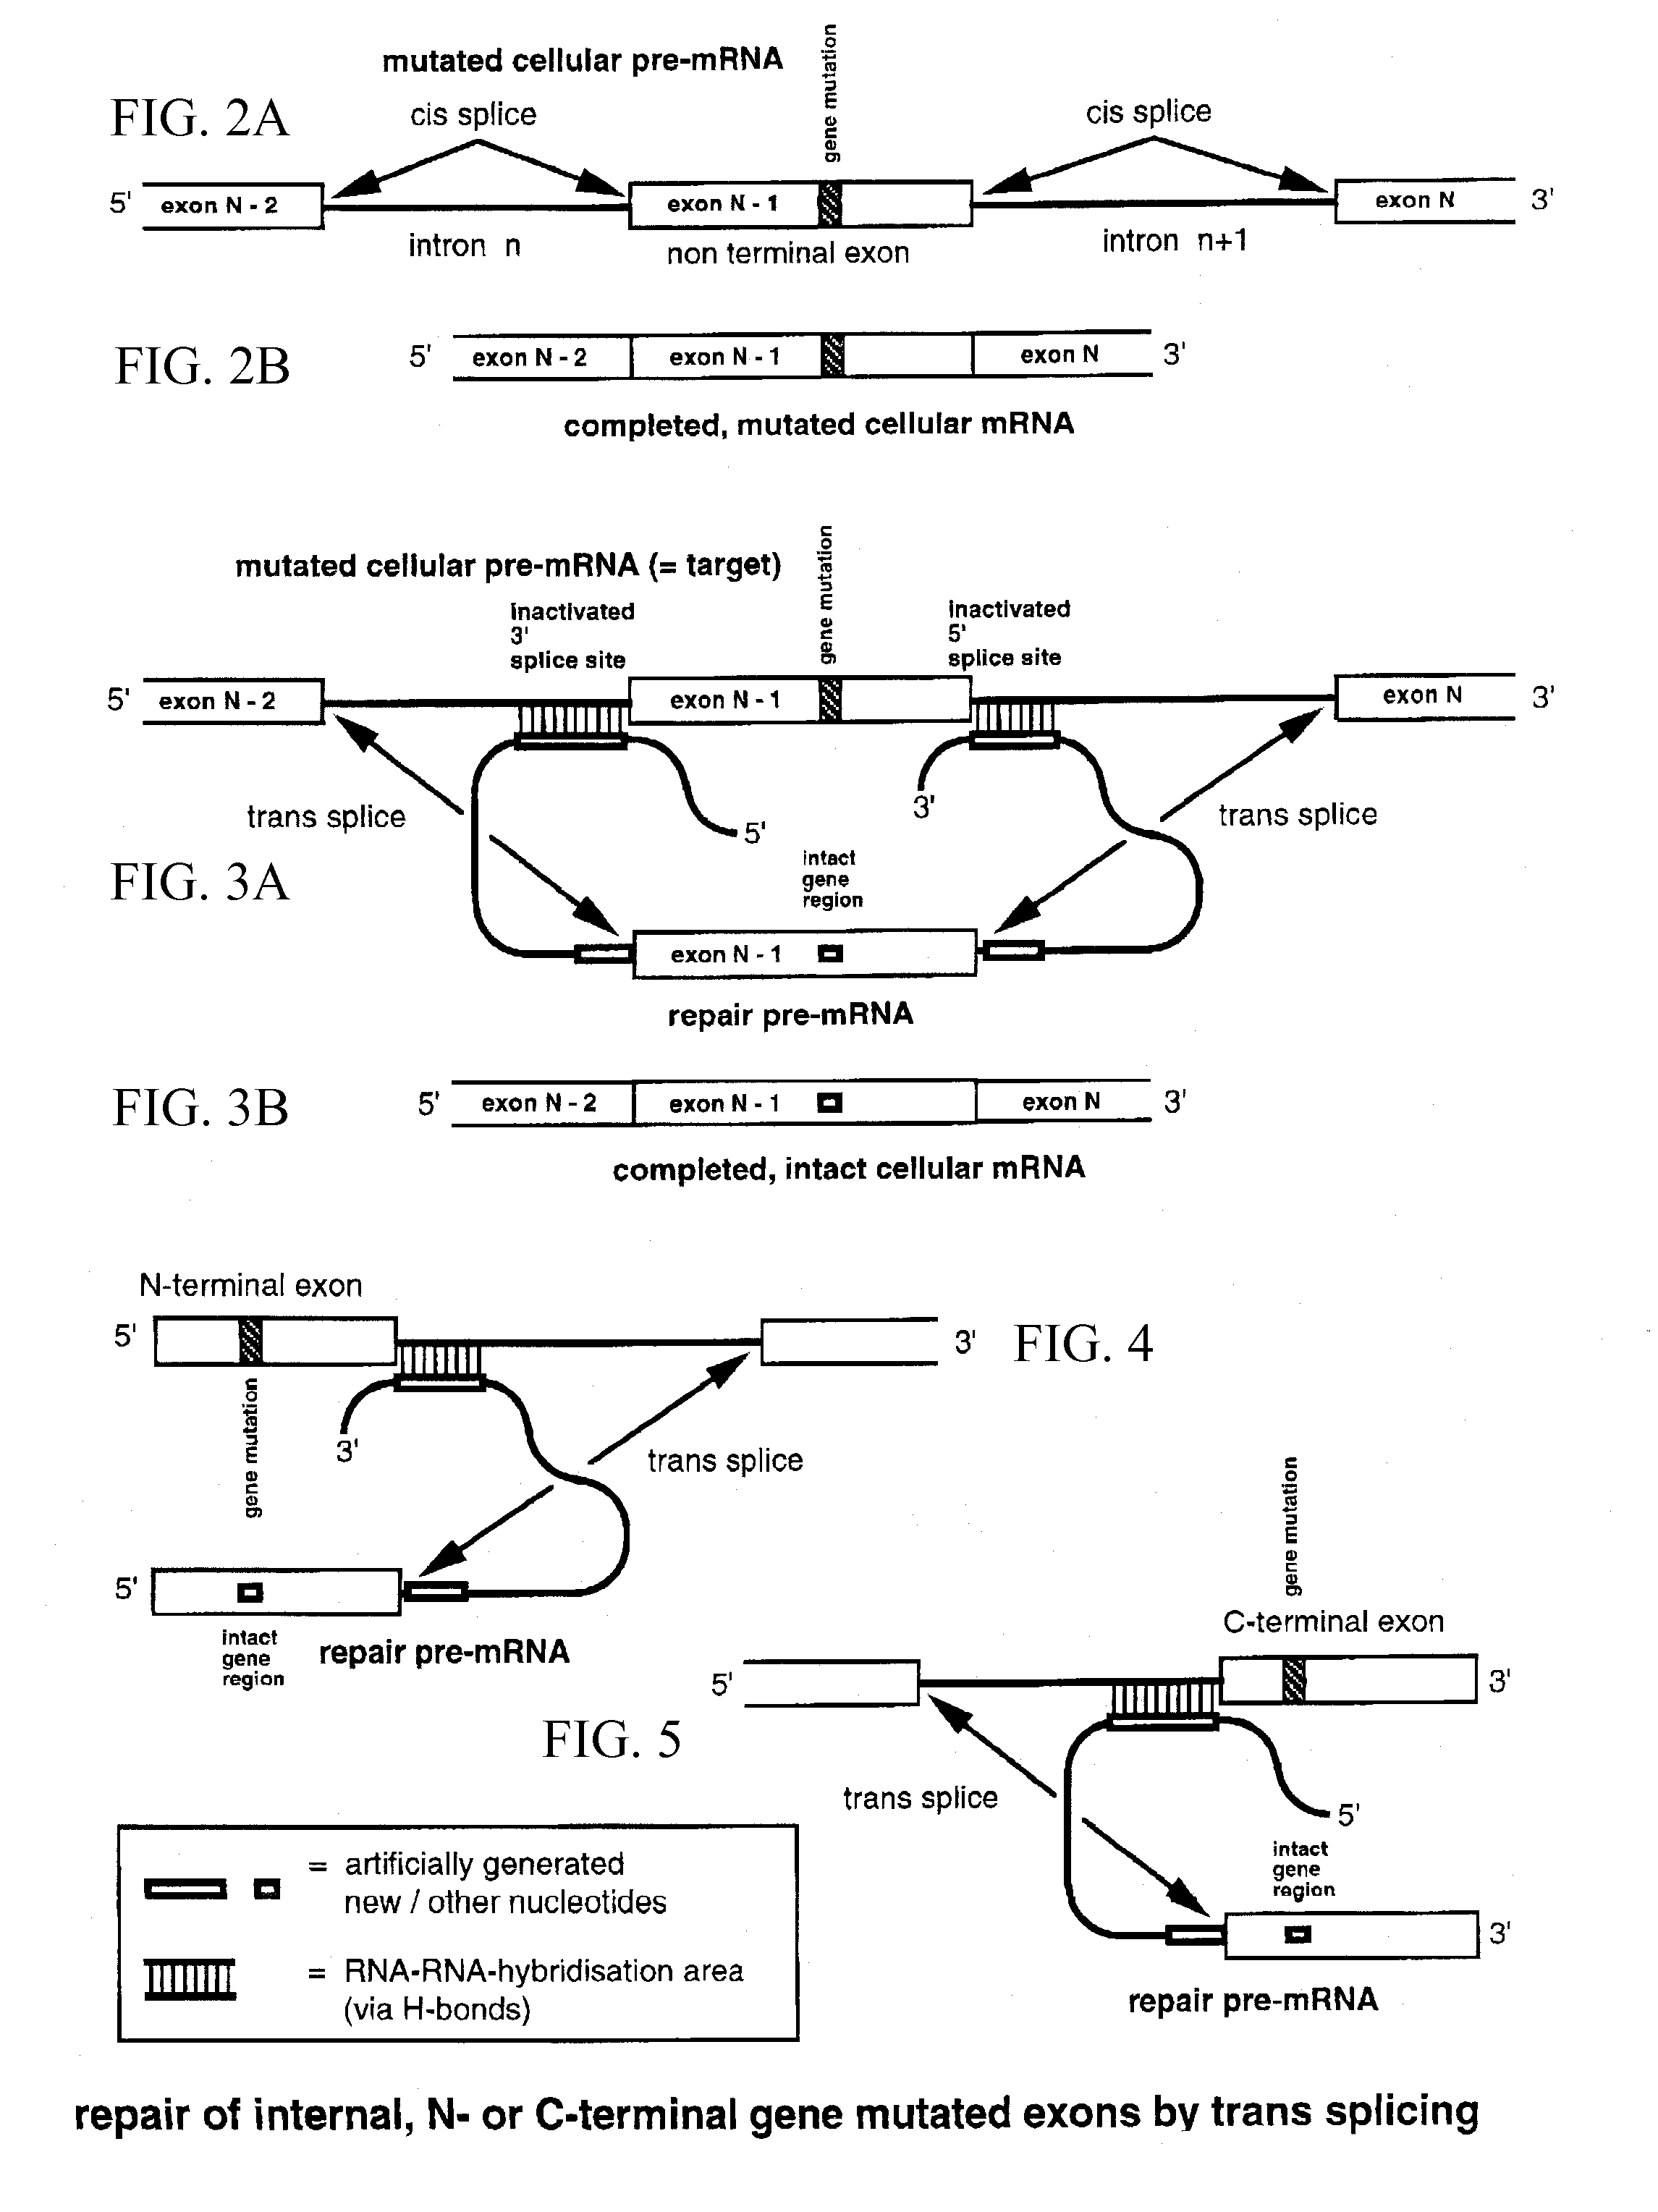 Method for the repair of mutated RNA from genetically defective DNA and for the specific destruction of tumor cells by RNA trans-splicing, and a method for the detection of naturally trans-spliced cellular RNA